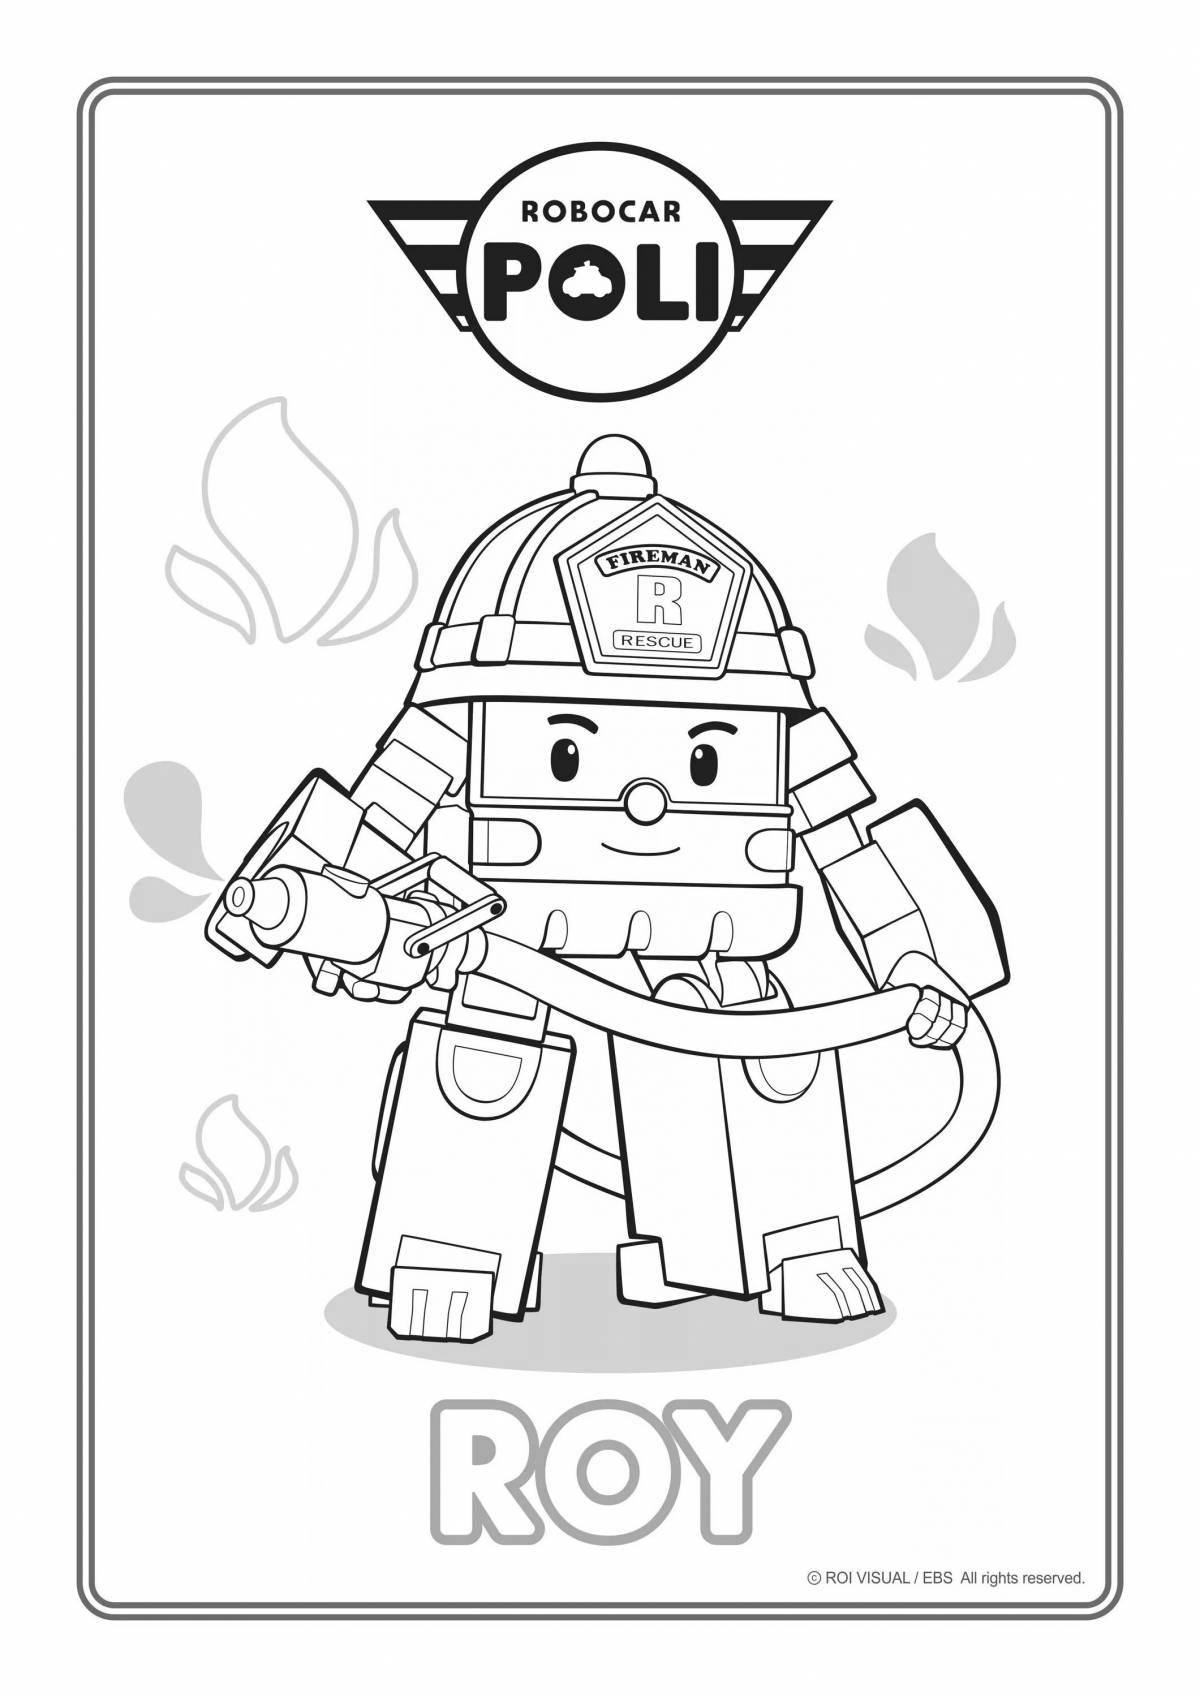 Mark robocar poly awesome coloring book